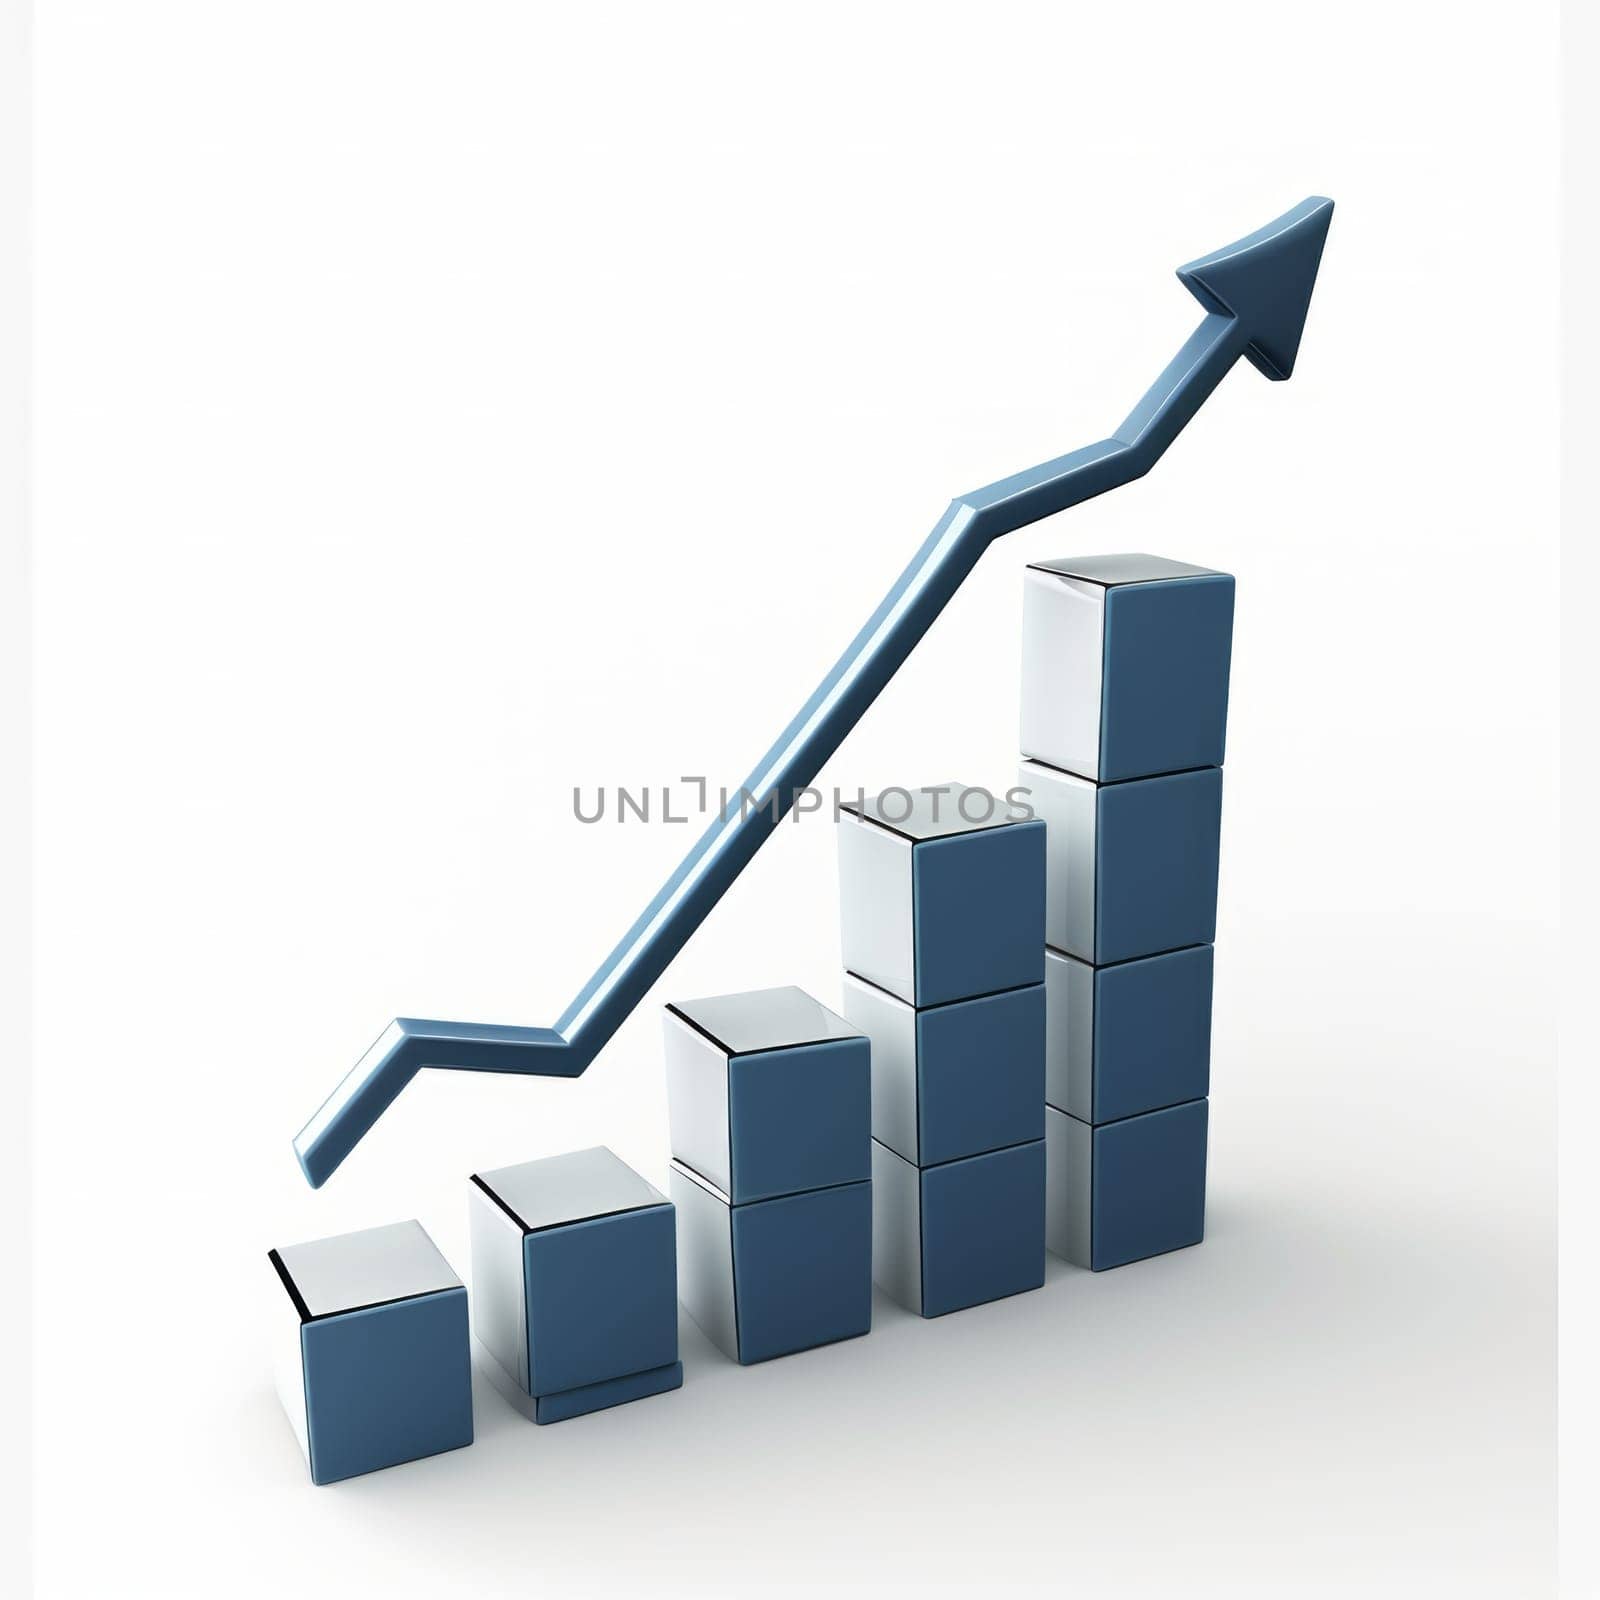 uptrend line arrows go up with bar chart in flat icon design on white background.